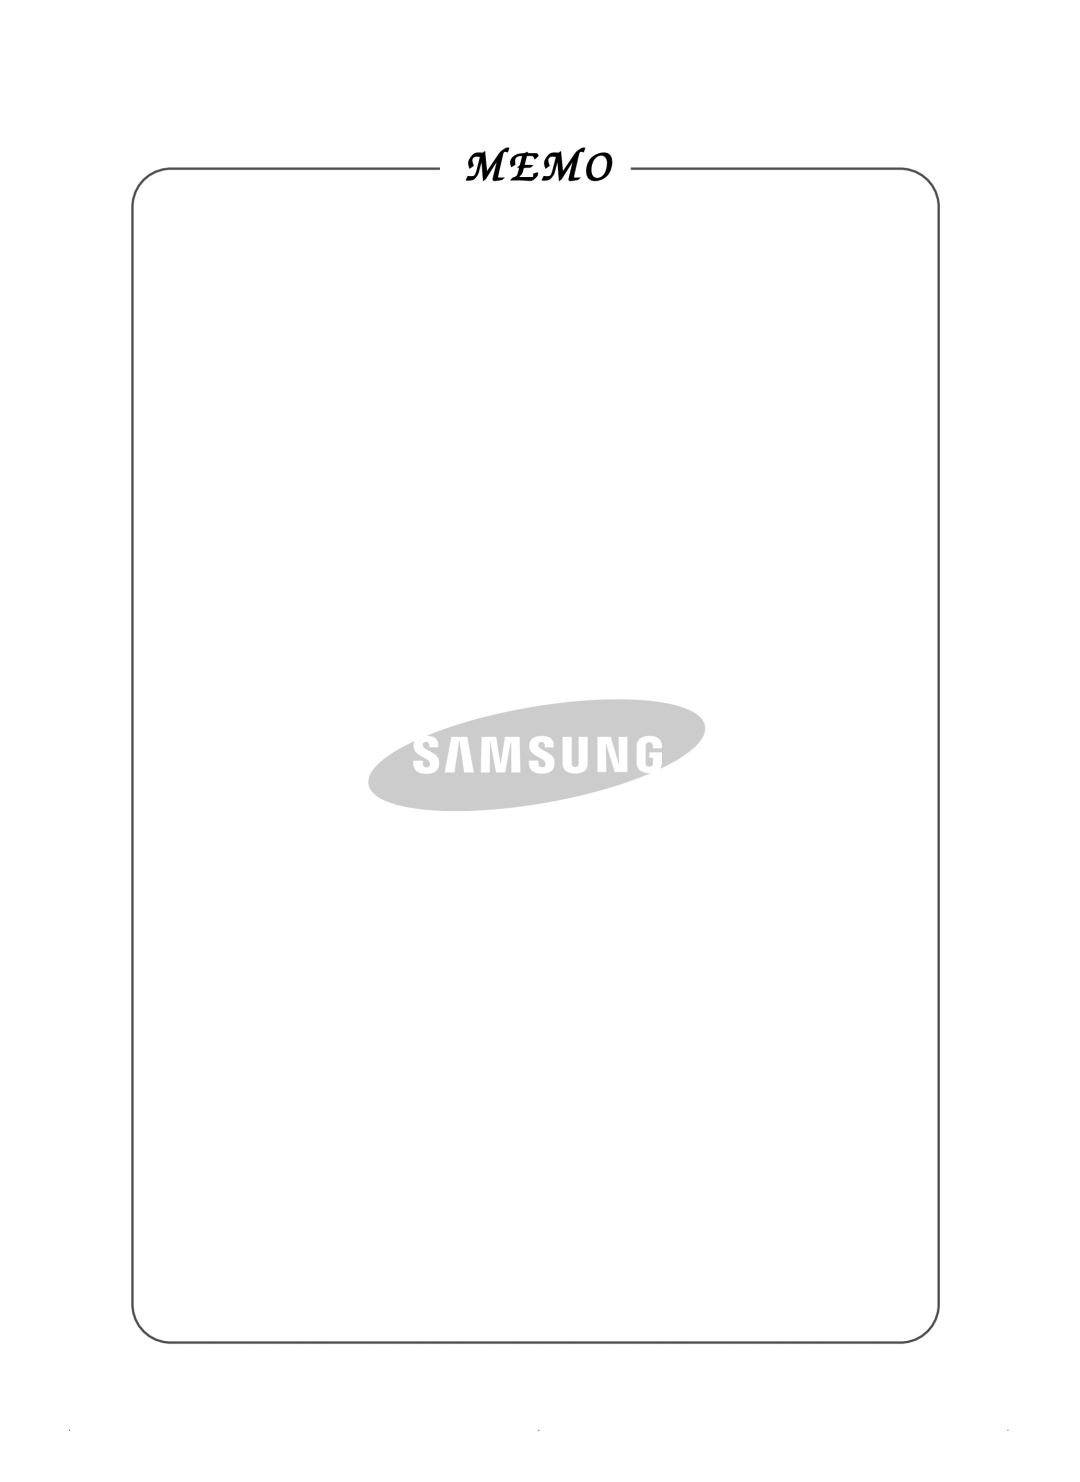 Samsung SU-2930 Series important safety instructions M E M O 